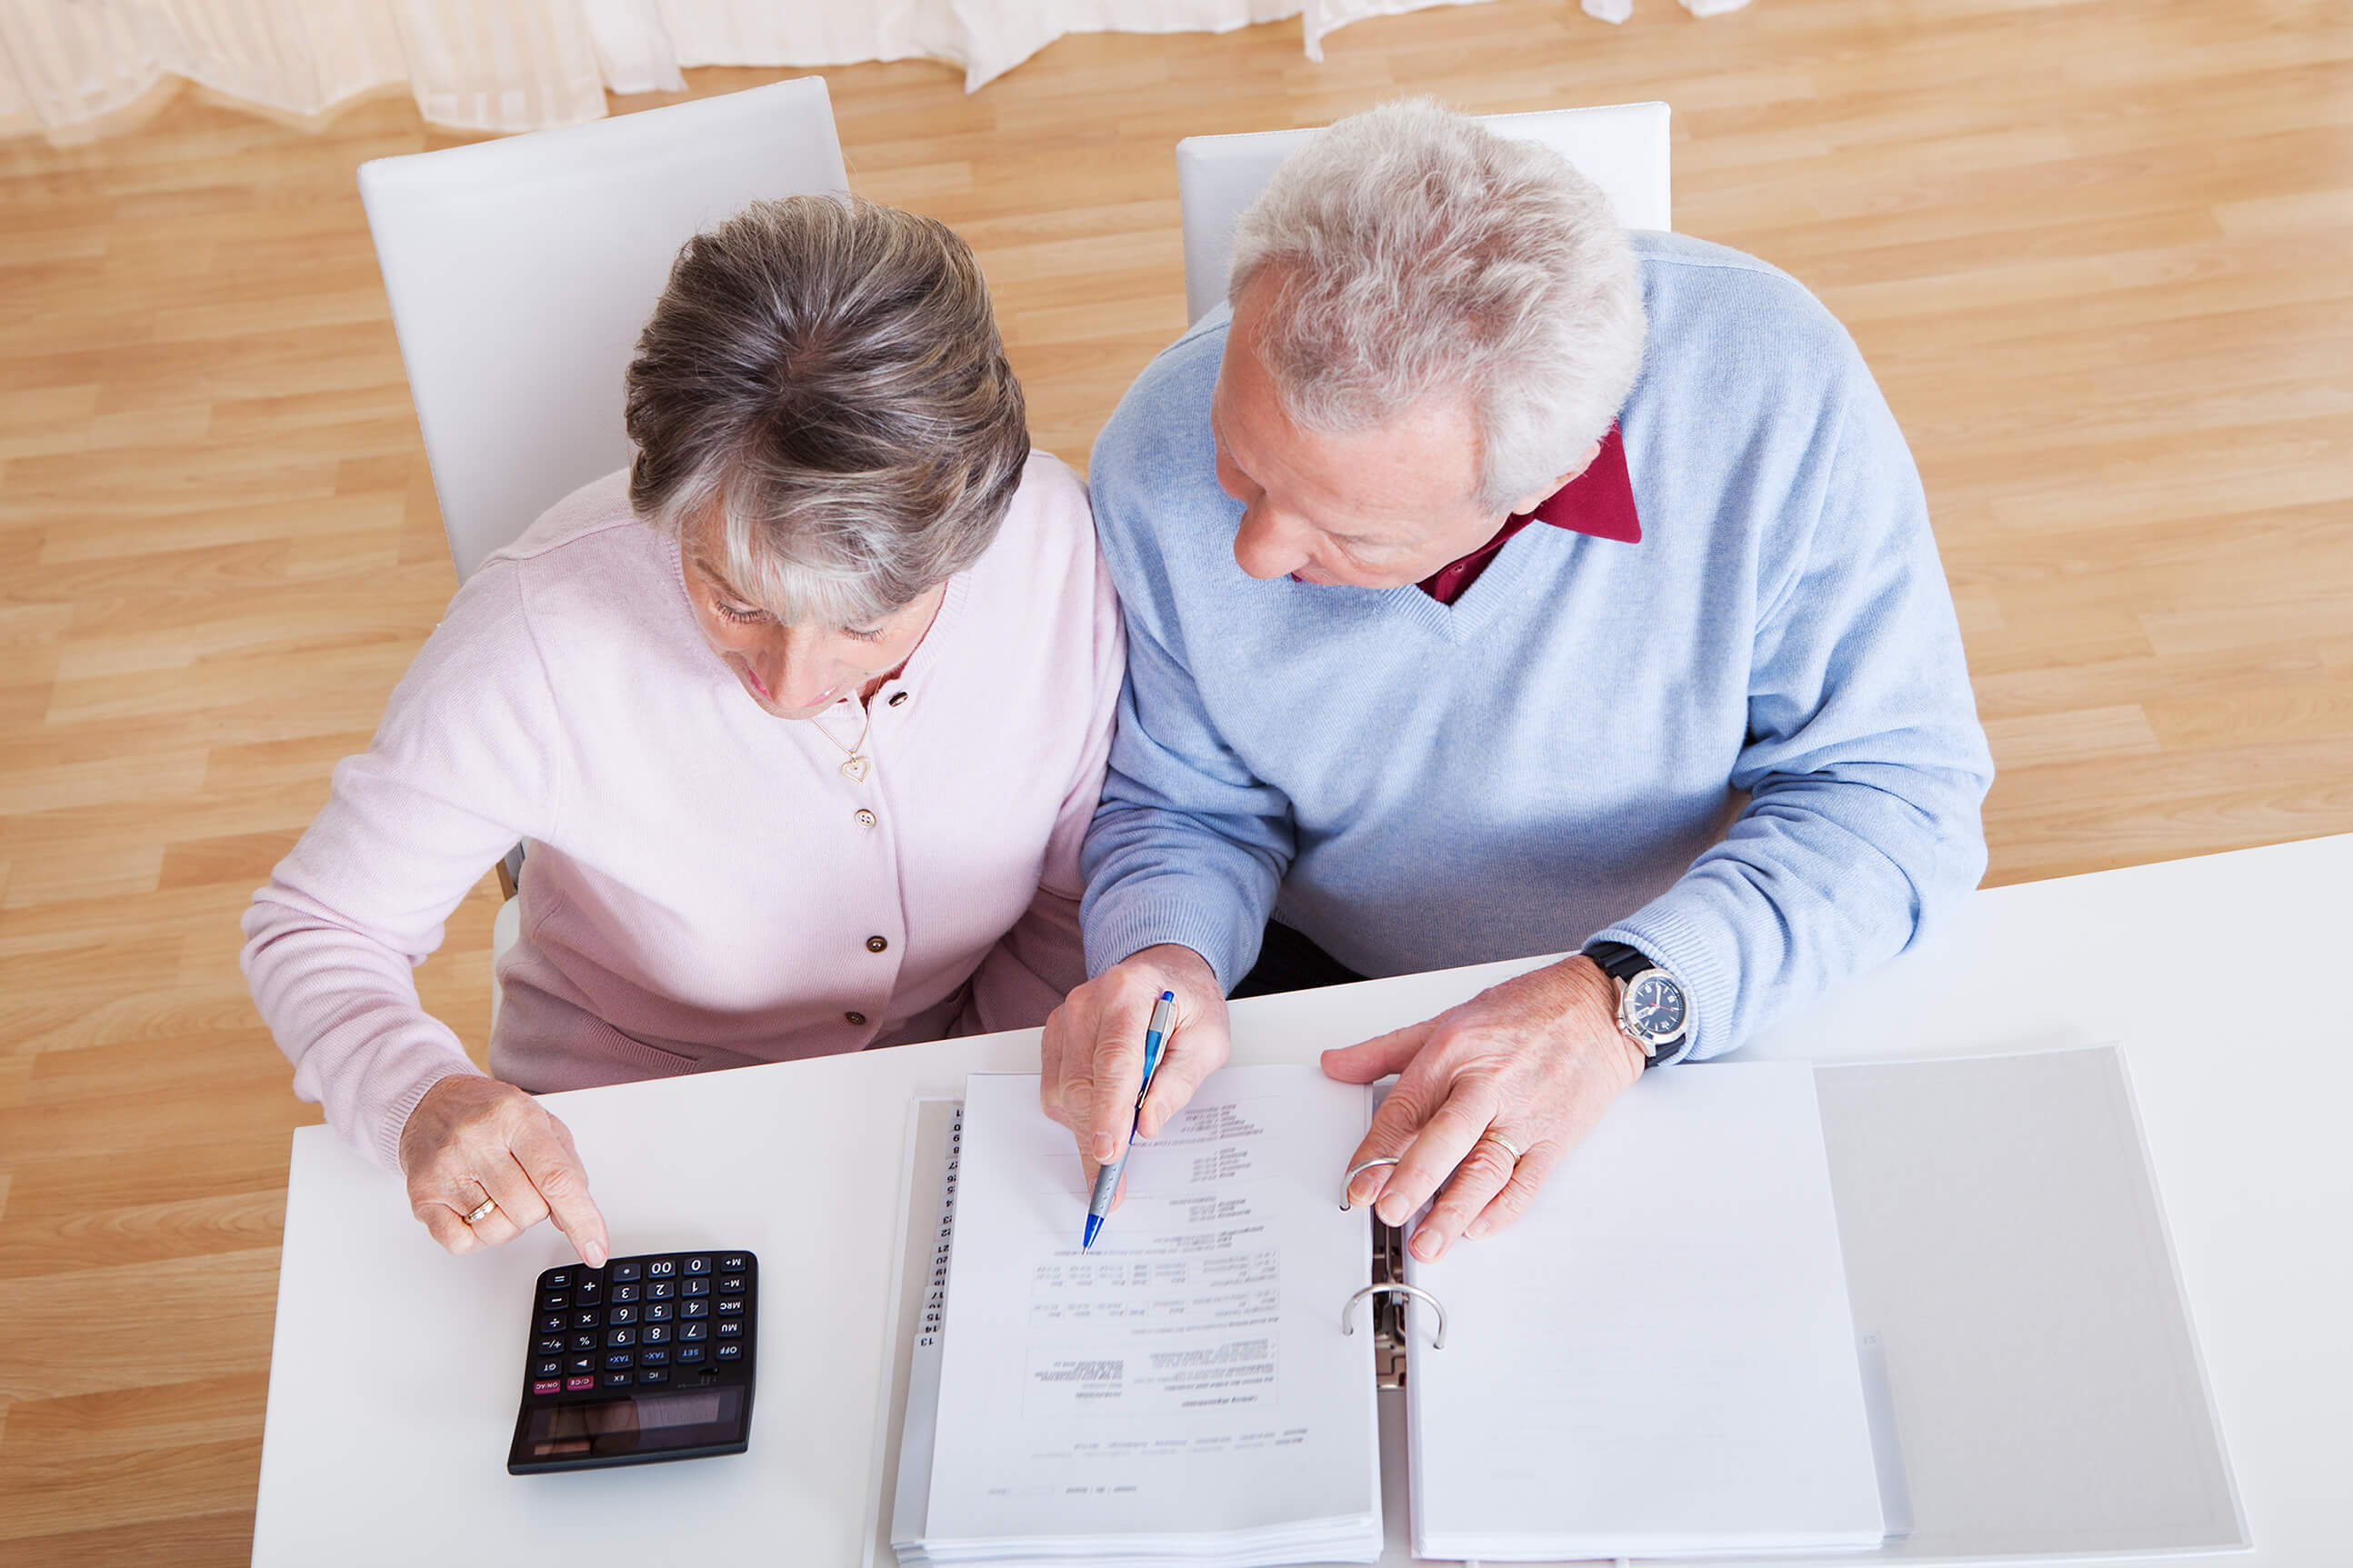 How to Manage Finances at a Senior Living Community